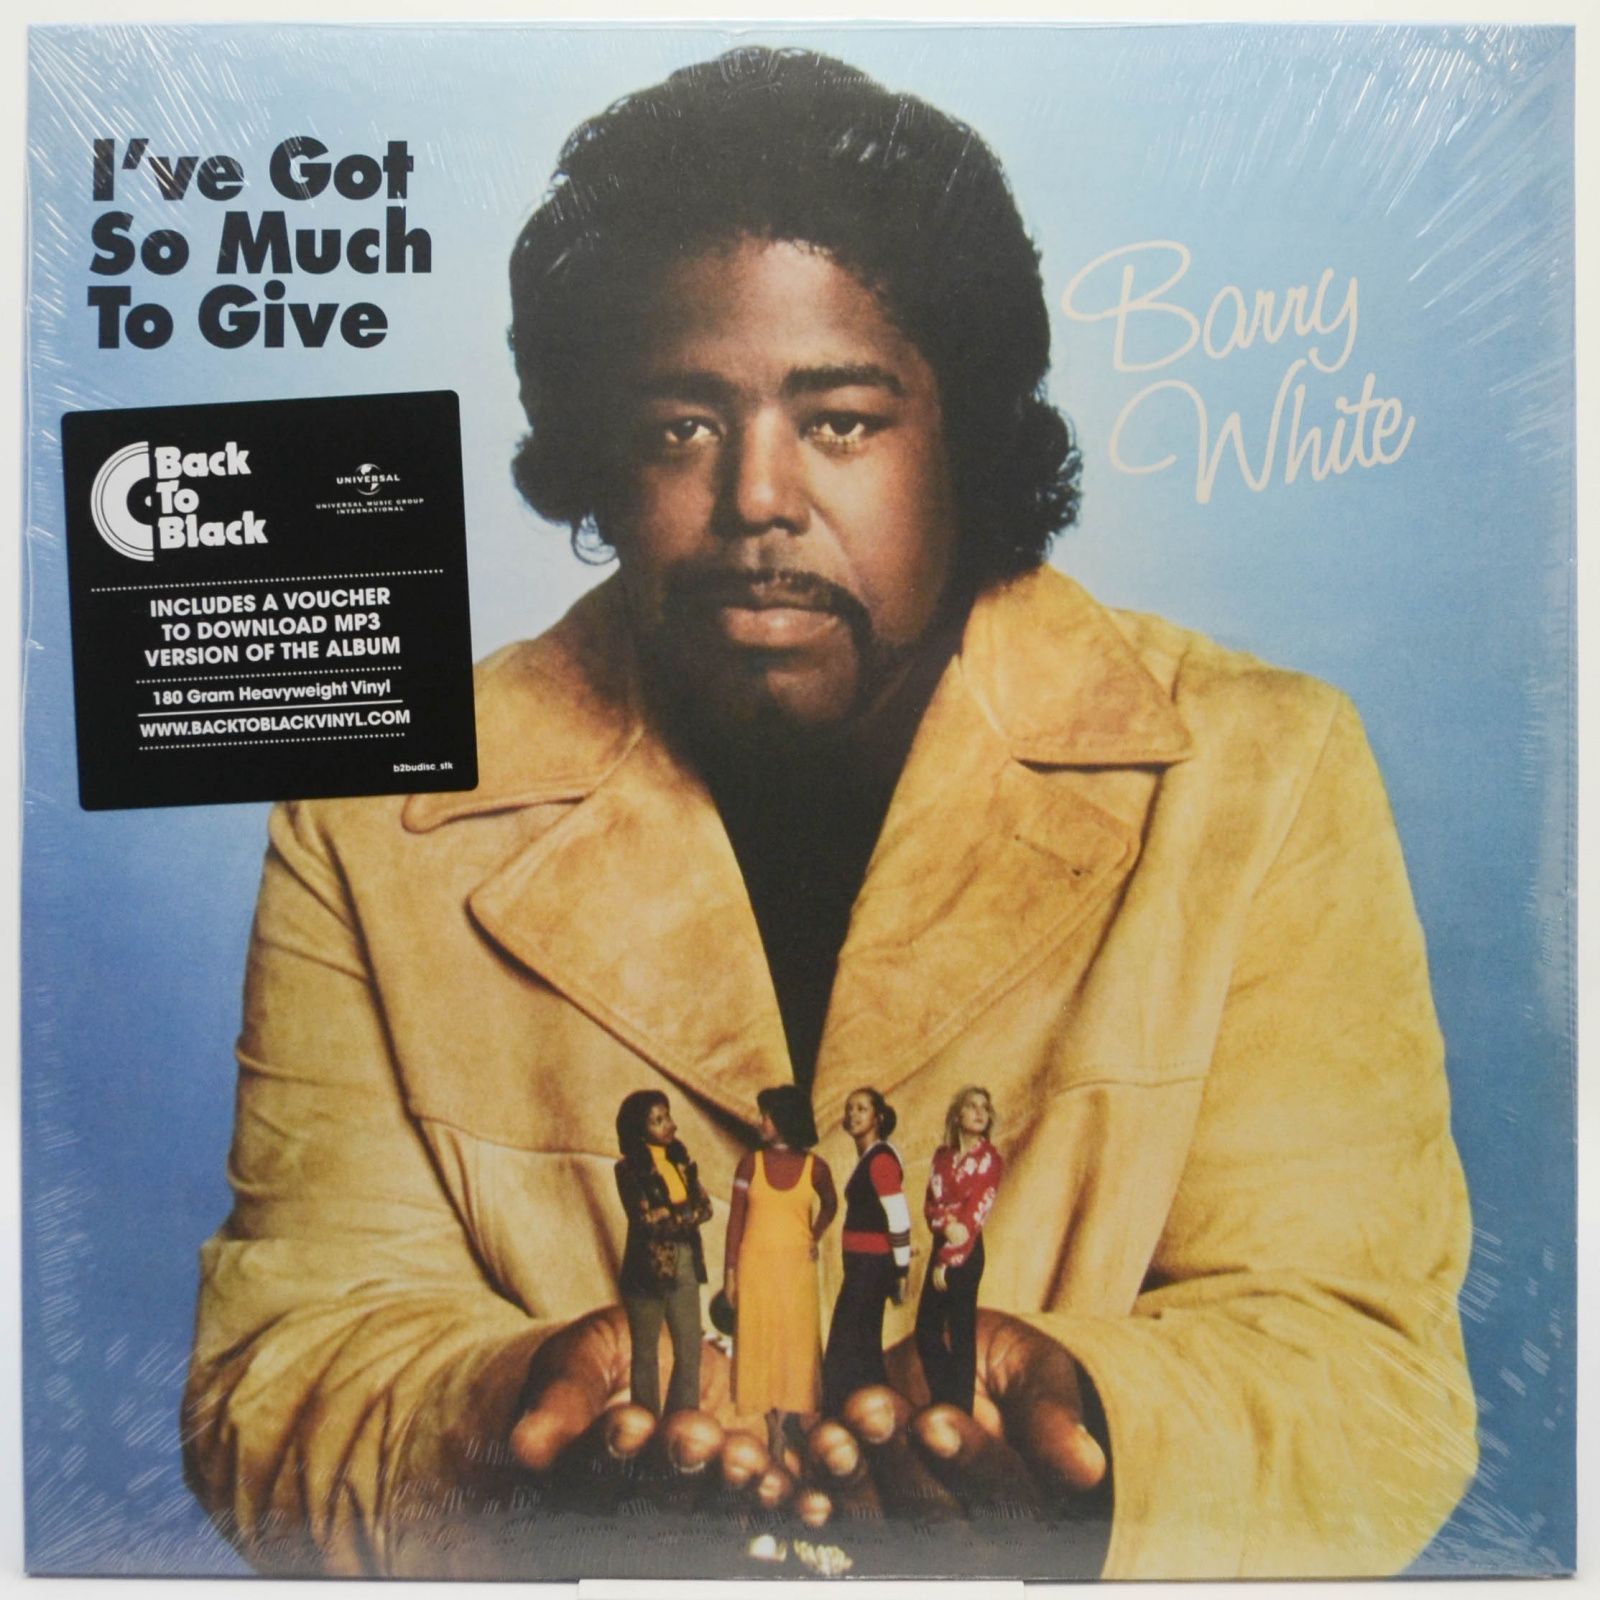 I've Got So Much To Give, 1973